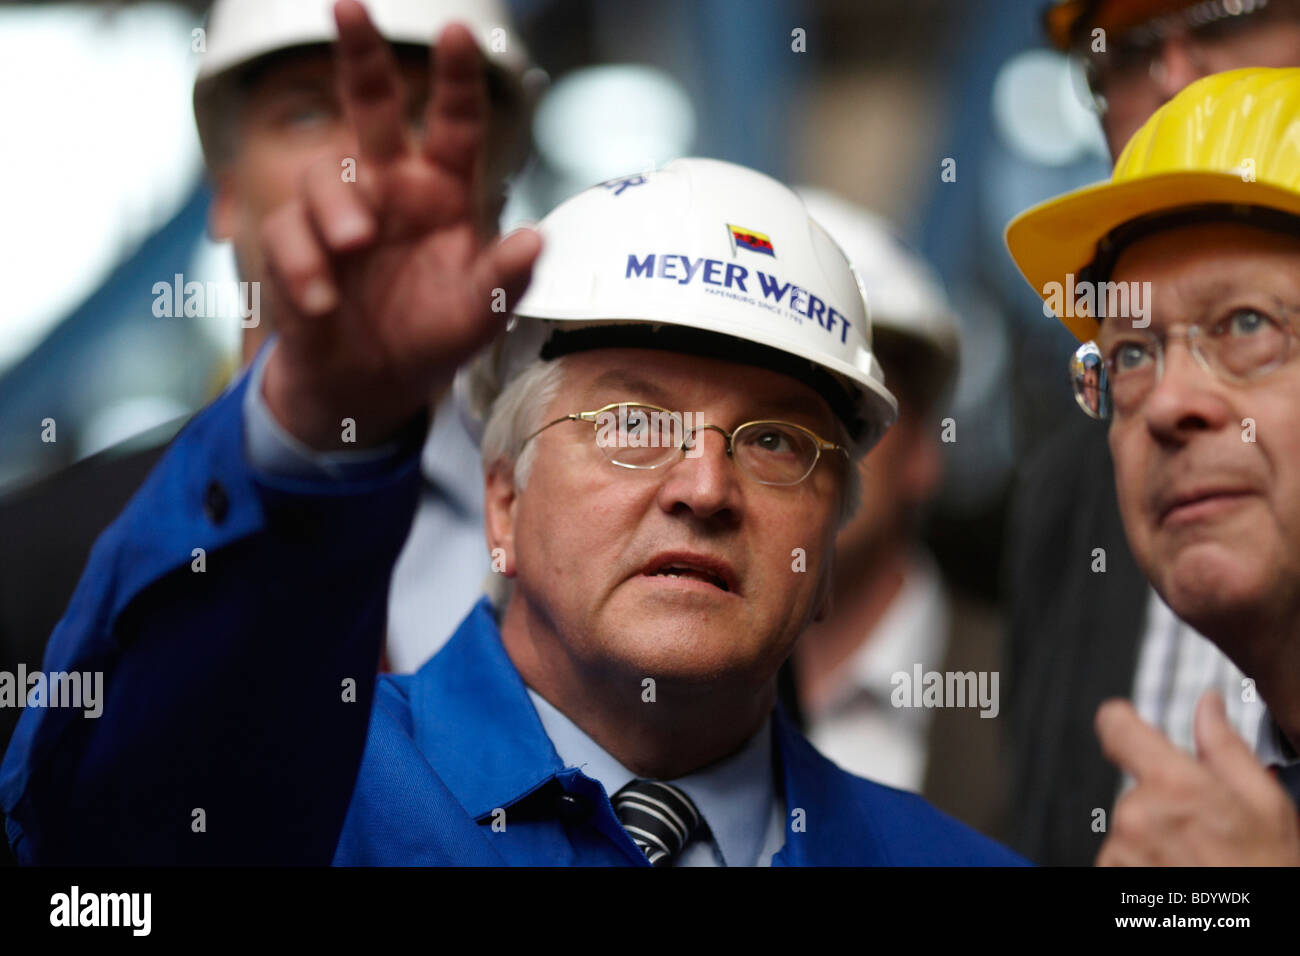 German Foreign Minister, Vice-Chancellor and SPD Chancellor Candidate Frank-Walter Steinmeier gesticulating during a visit to t Stock Photo